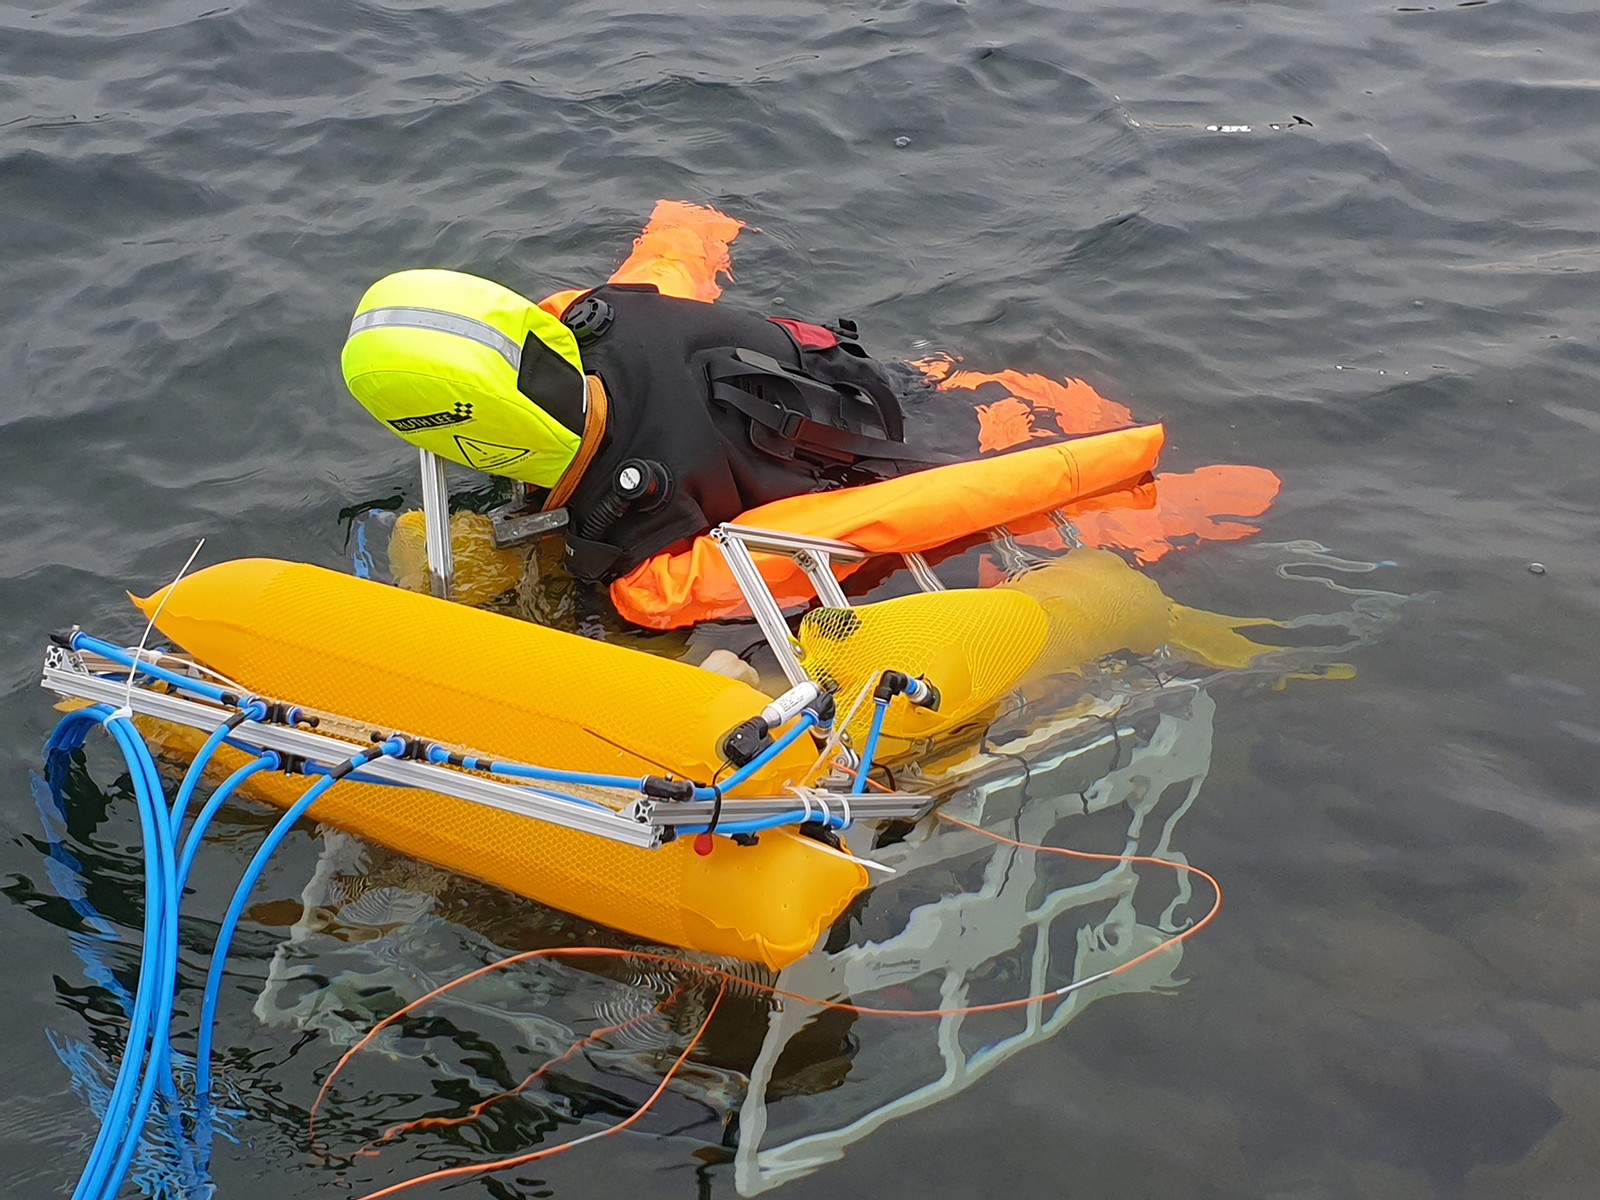 The aquatic robot transports the dummy to shore via the shortest route.